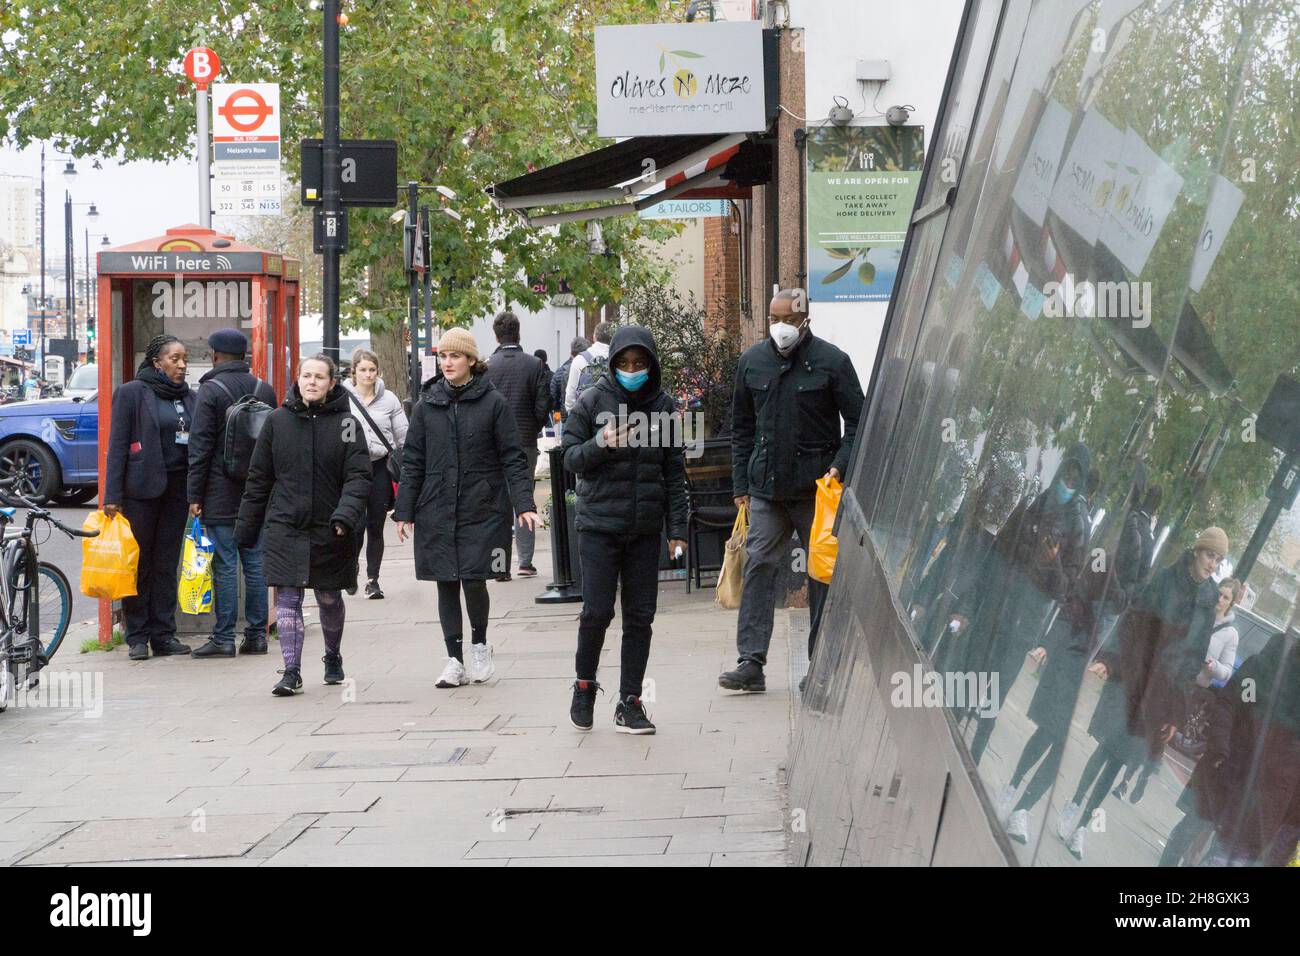 London, UK, 30 November 2021: Shoppers are now obliged by law to wear a face mask in shops or on public transport. At the Clapham High Street branch of Sainsbury's supermarket, shoppers come and go, often removing their masks as soon as they step into the fresh air outside. Anna Watson/Alamy Live News Stock Photo